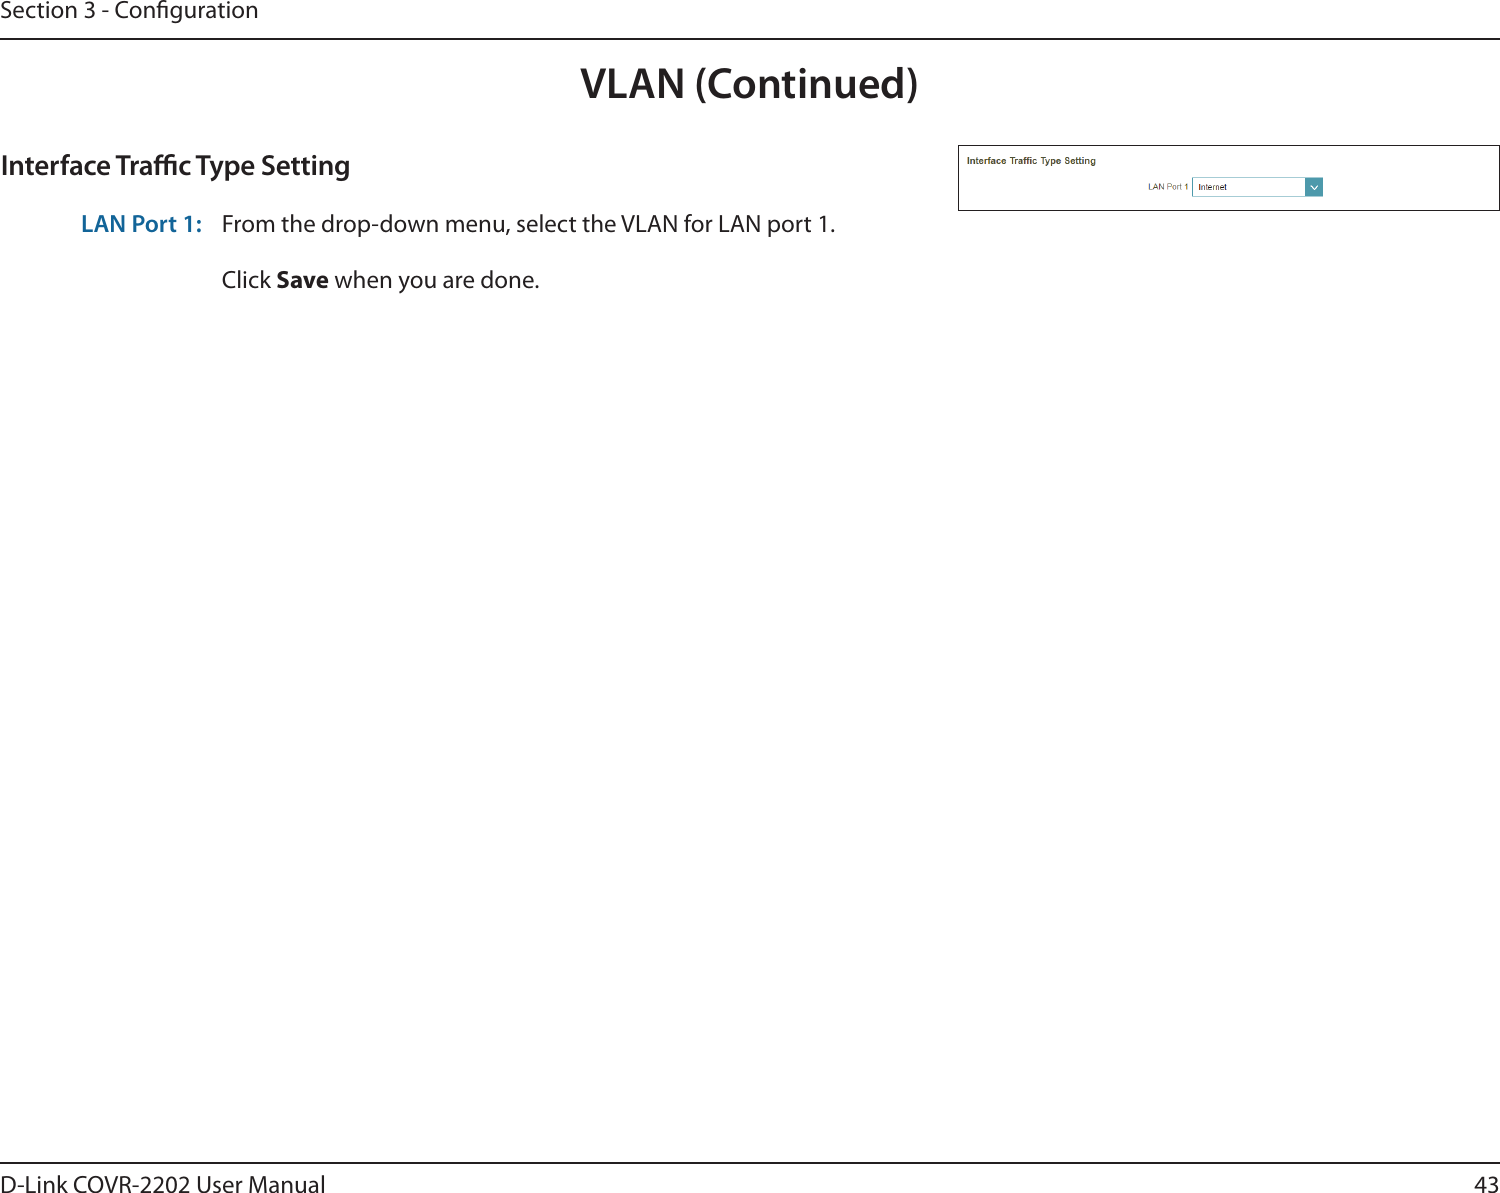 43D-Link COVR-2202 User ManualSection 3 - CongurationInterface Trac Type SettingLAN Port 1: From the drop-down menu, select the VLAN for LAN port 1.Click Save when you are done.VLAN (Continued)